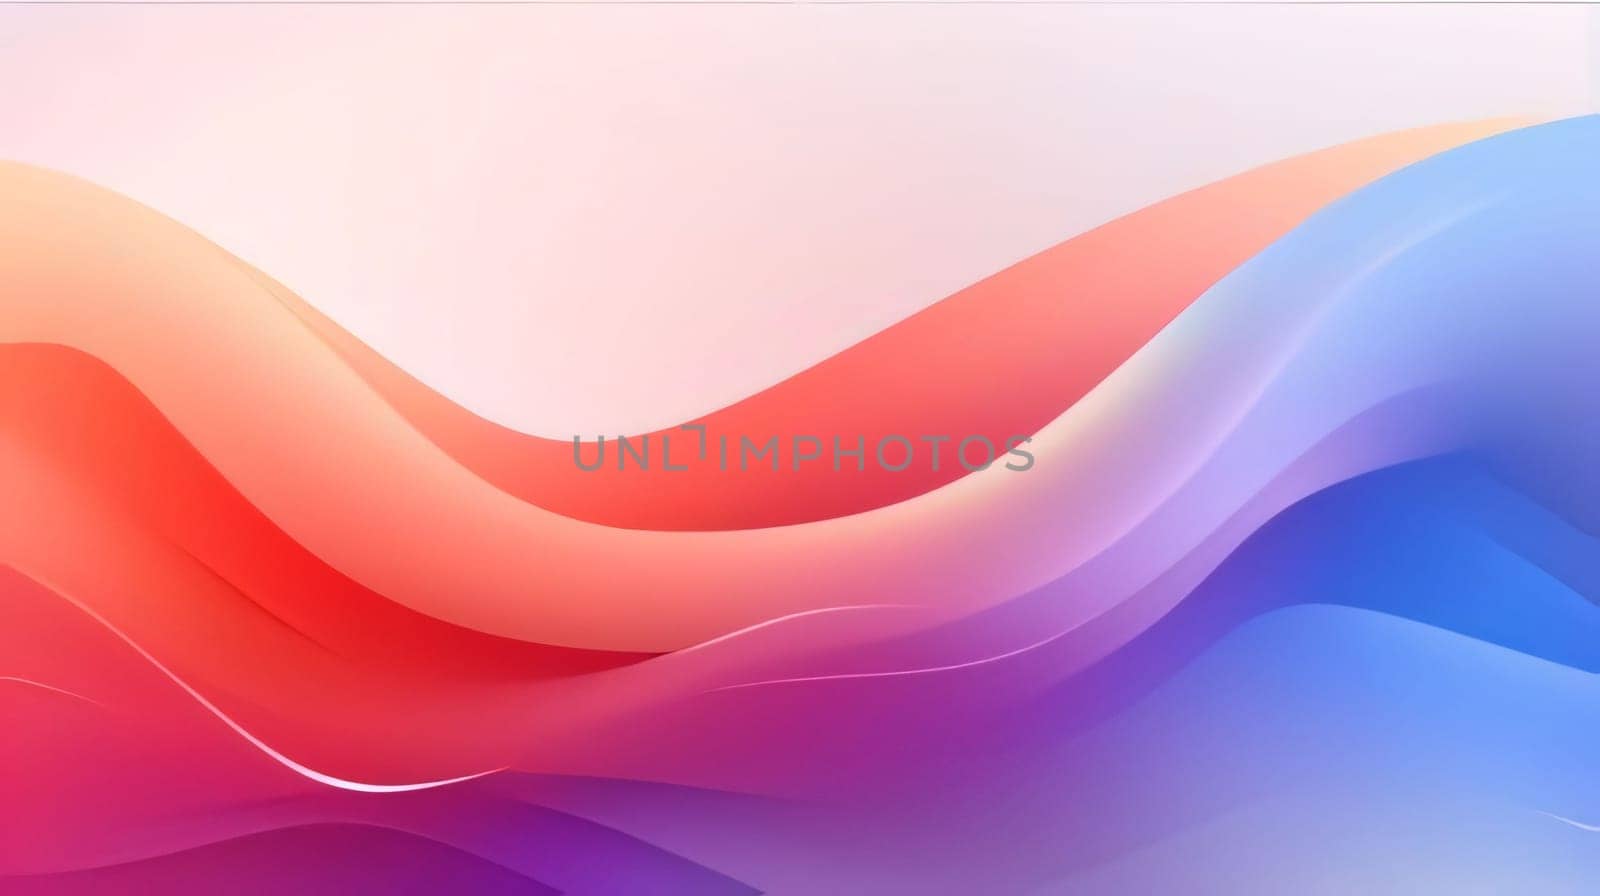 Abstract background design: abstract background with smooth lines in pink, blue and orange colors